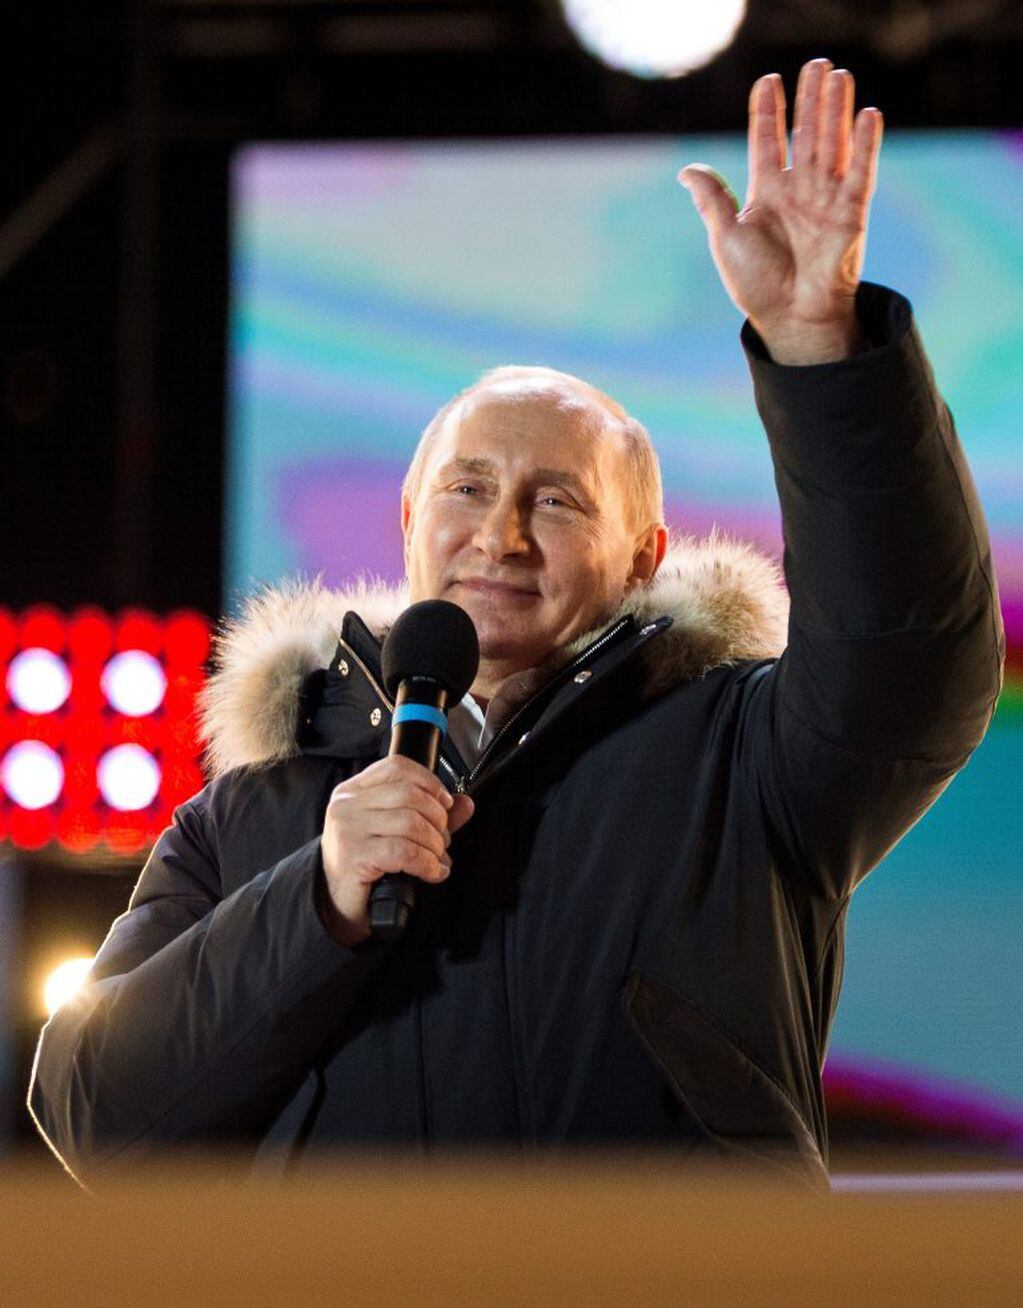 Russian President Vladimir Putin waves after speaking to supporters during a rally near the Kremlin in Moscow, Sunday, March 18, 2018. Vladimir Putin headed to an overwhelming win in Russia's presidential election Sunday, adding six years in the Kremlin for the man who has led the world's largest country for all of the 21st century. (AP Photo/Alexander Zemlianichenko)